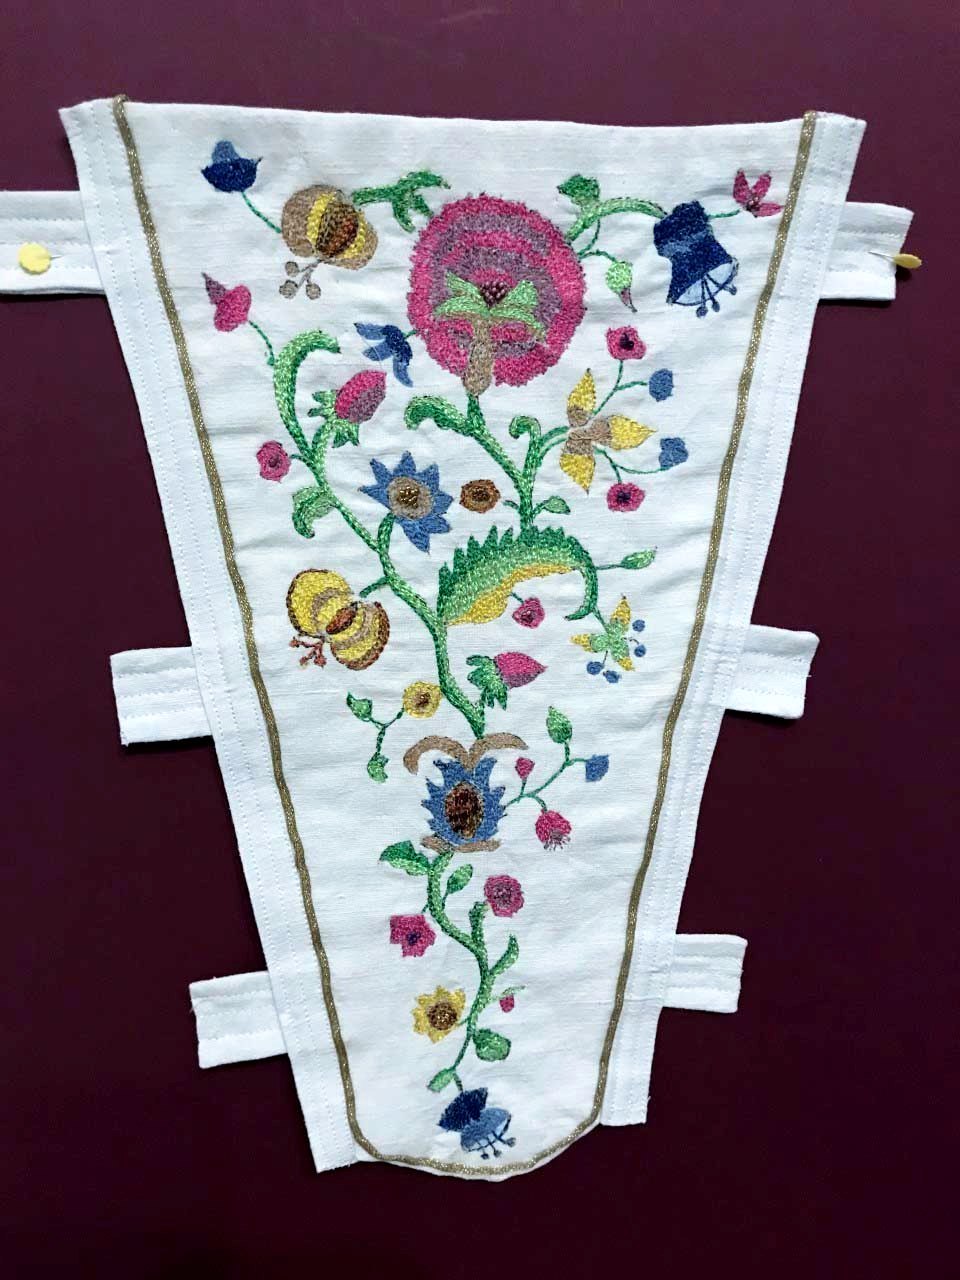 ELIZABETHAN STOMACHER by Pat McBride, machine embroidery, MEG display at NW Regional Day 2021